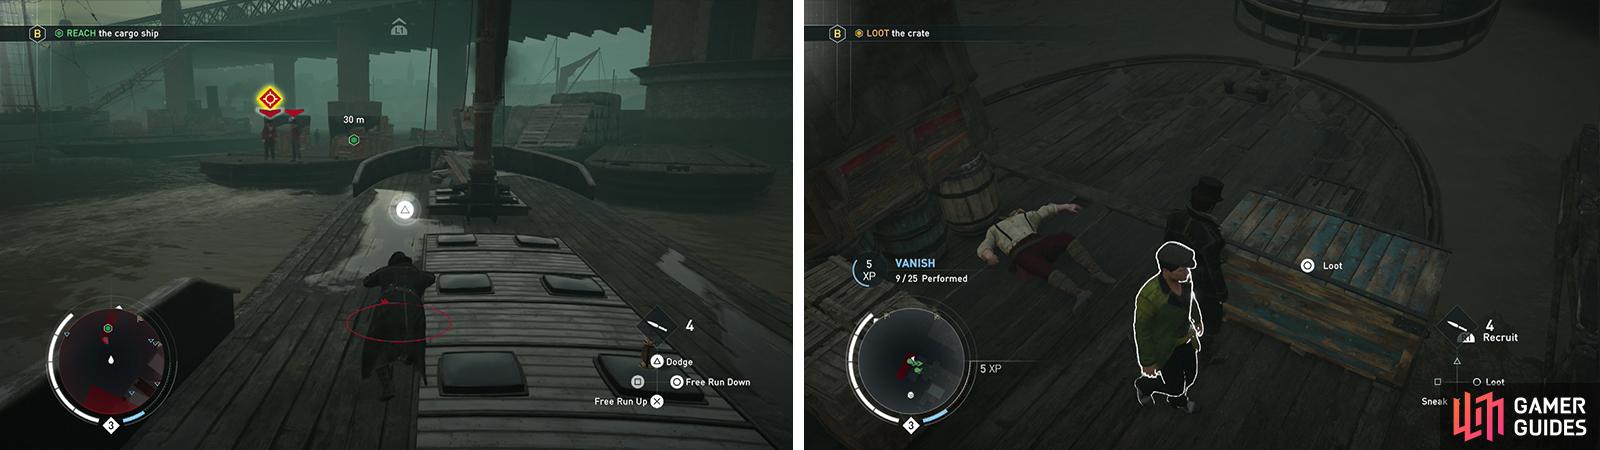 Chase the boat along the docks (left). Kill those aboard before looting the chest (right).